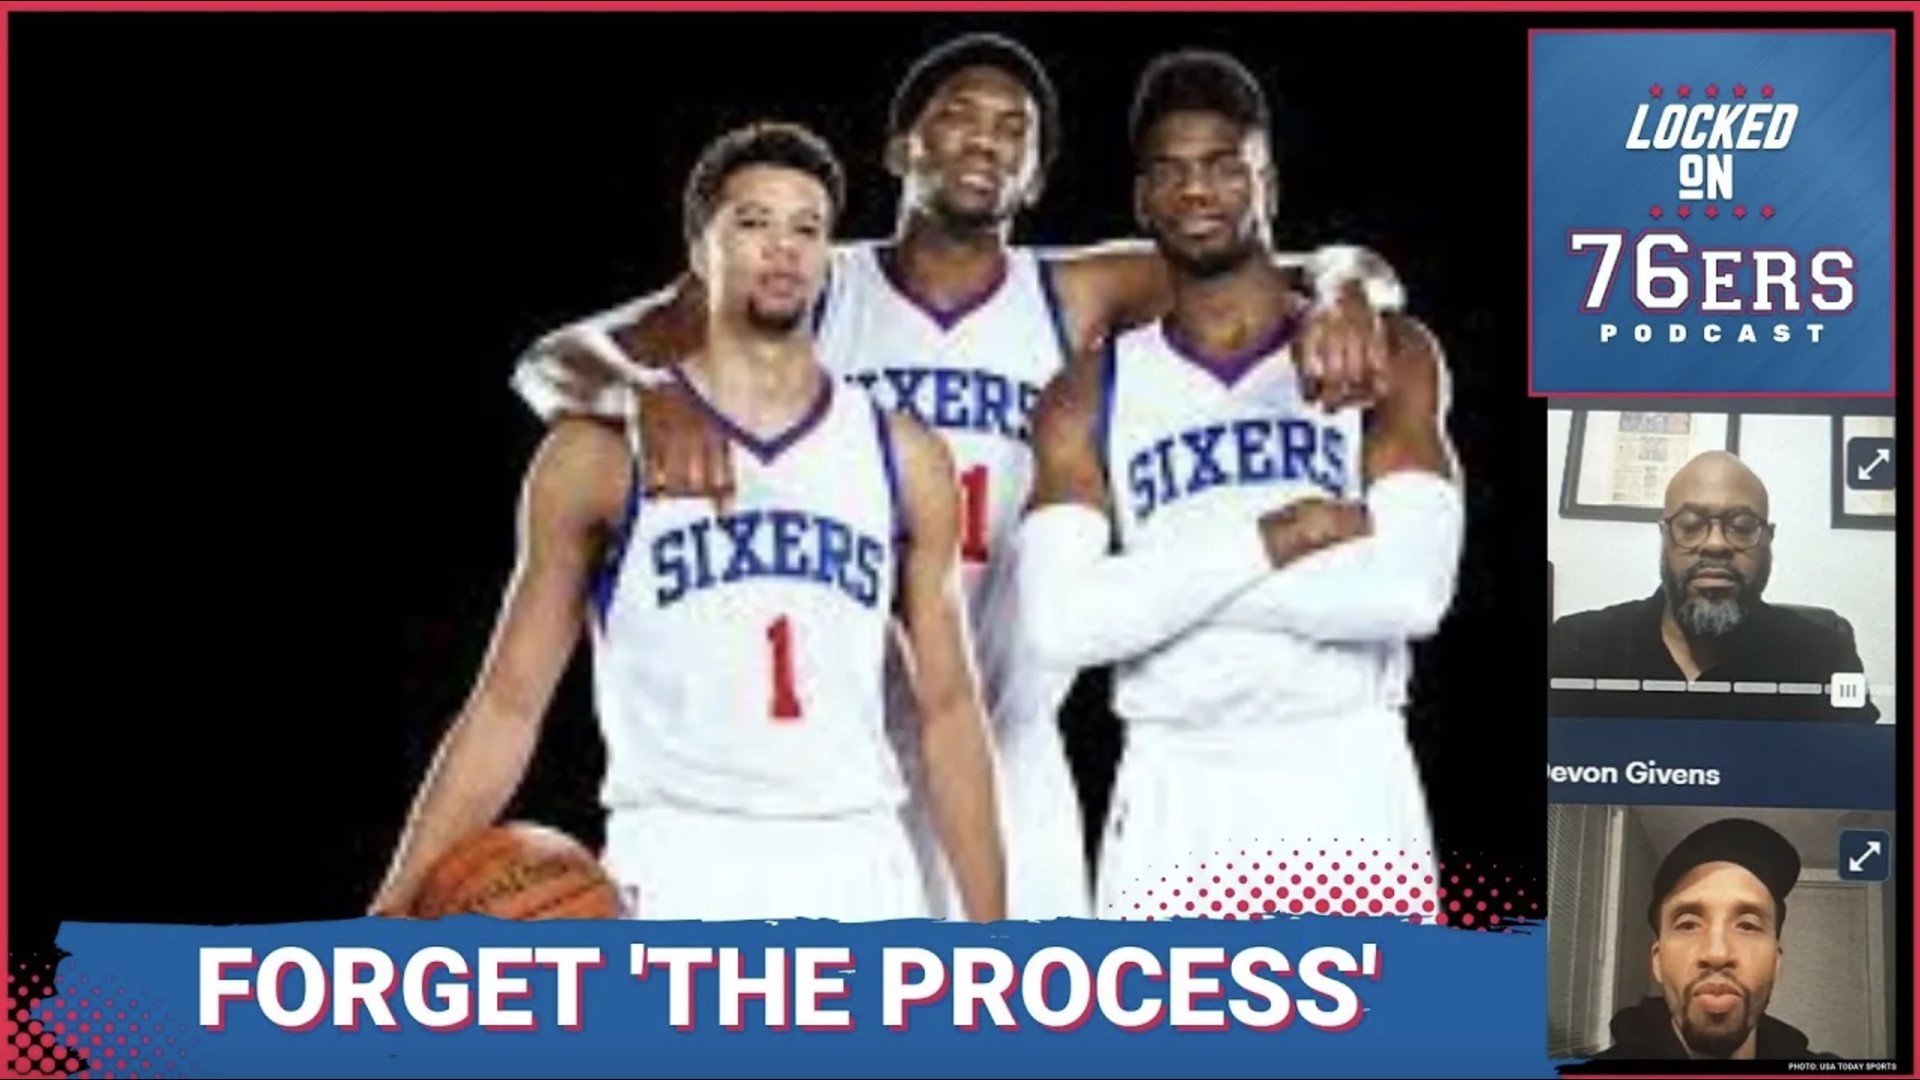 It's time for 76ers fans and reporters to move on from 'The Process.' Keith Pompey discusses that along with James Harden updates and what's the best fit for Sixers